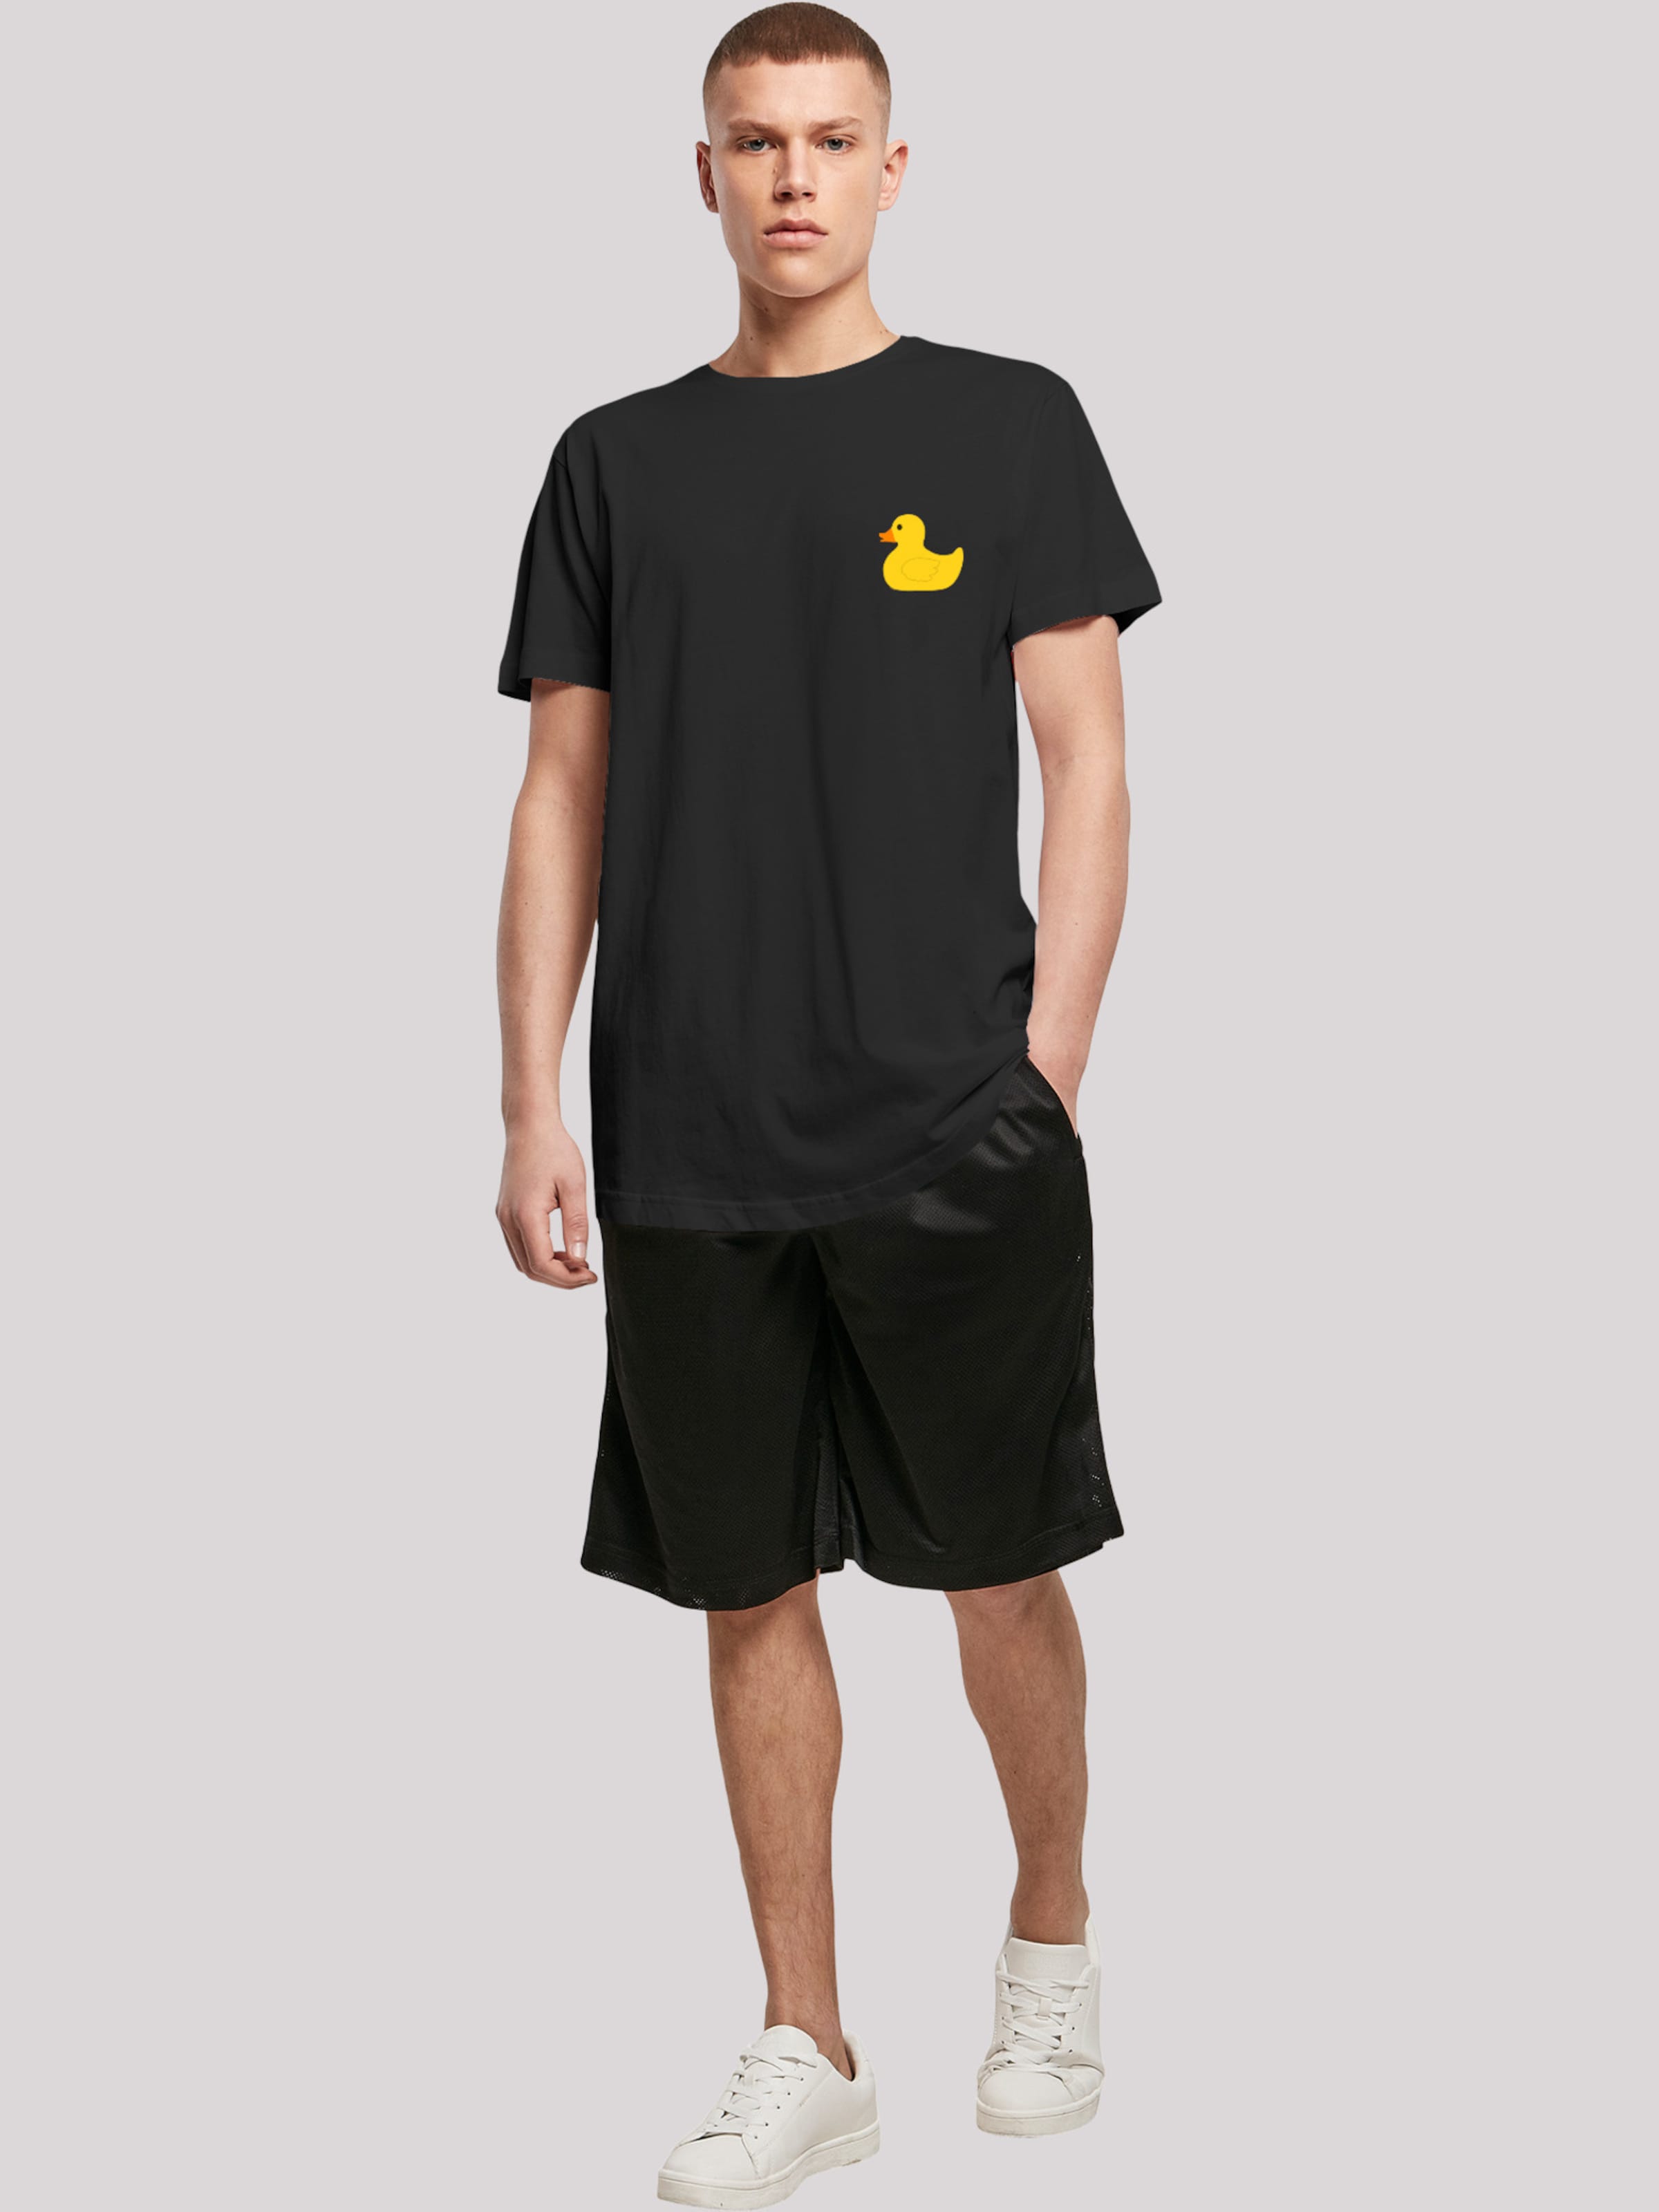 F4NT4STIC Shirt 'Yellow Rubber Duck' in Schwarz | ABOUT YOU